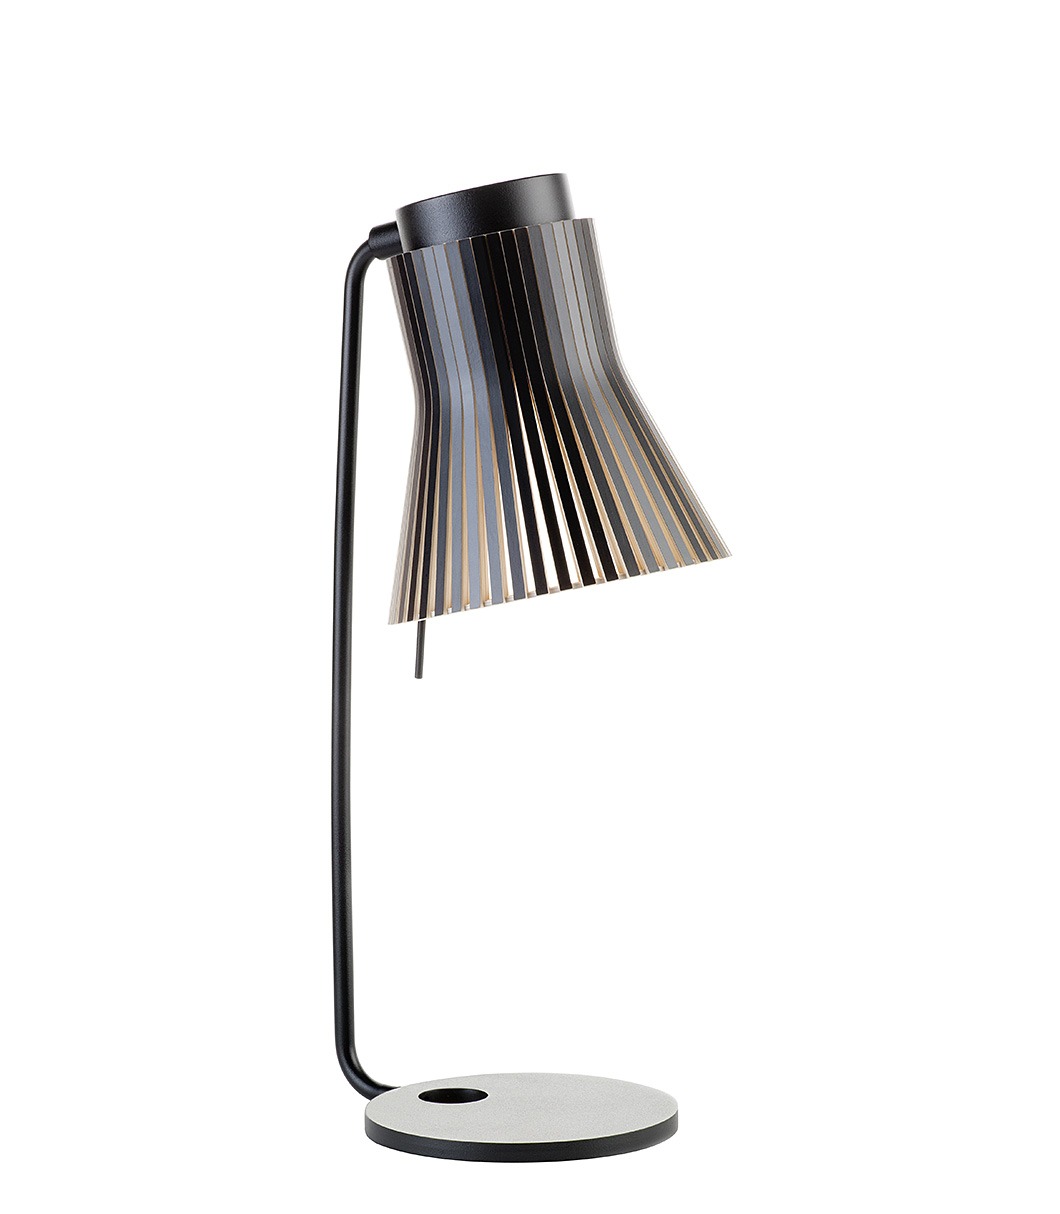 Petite 4620 table lamp is available in black laminated